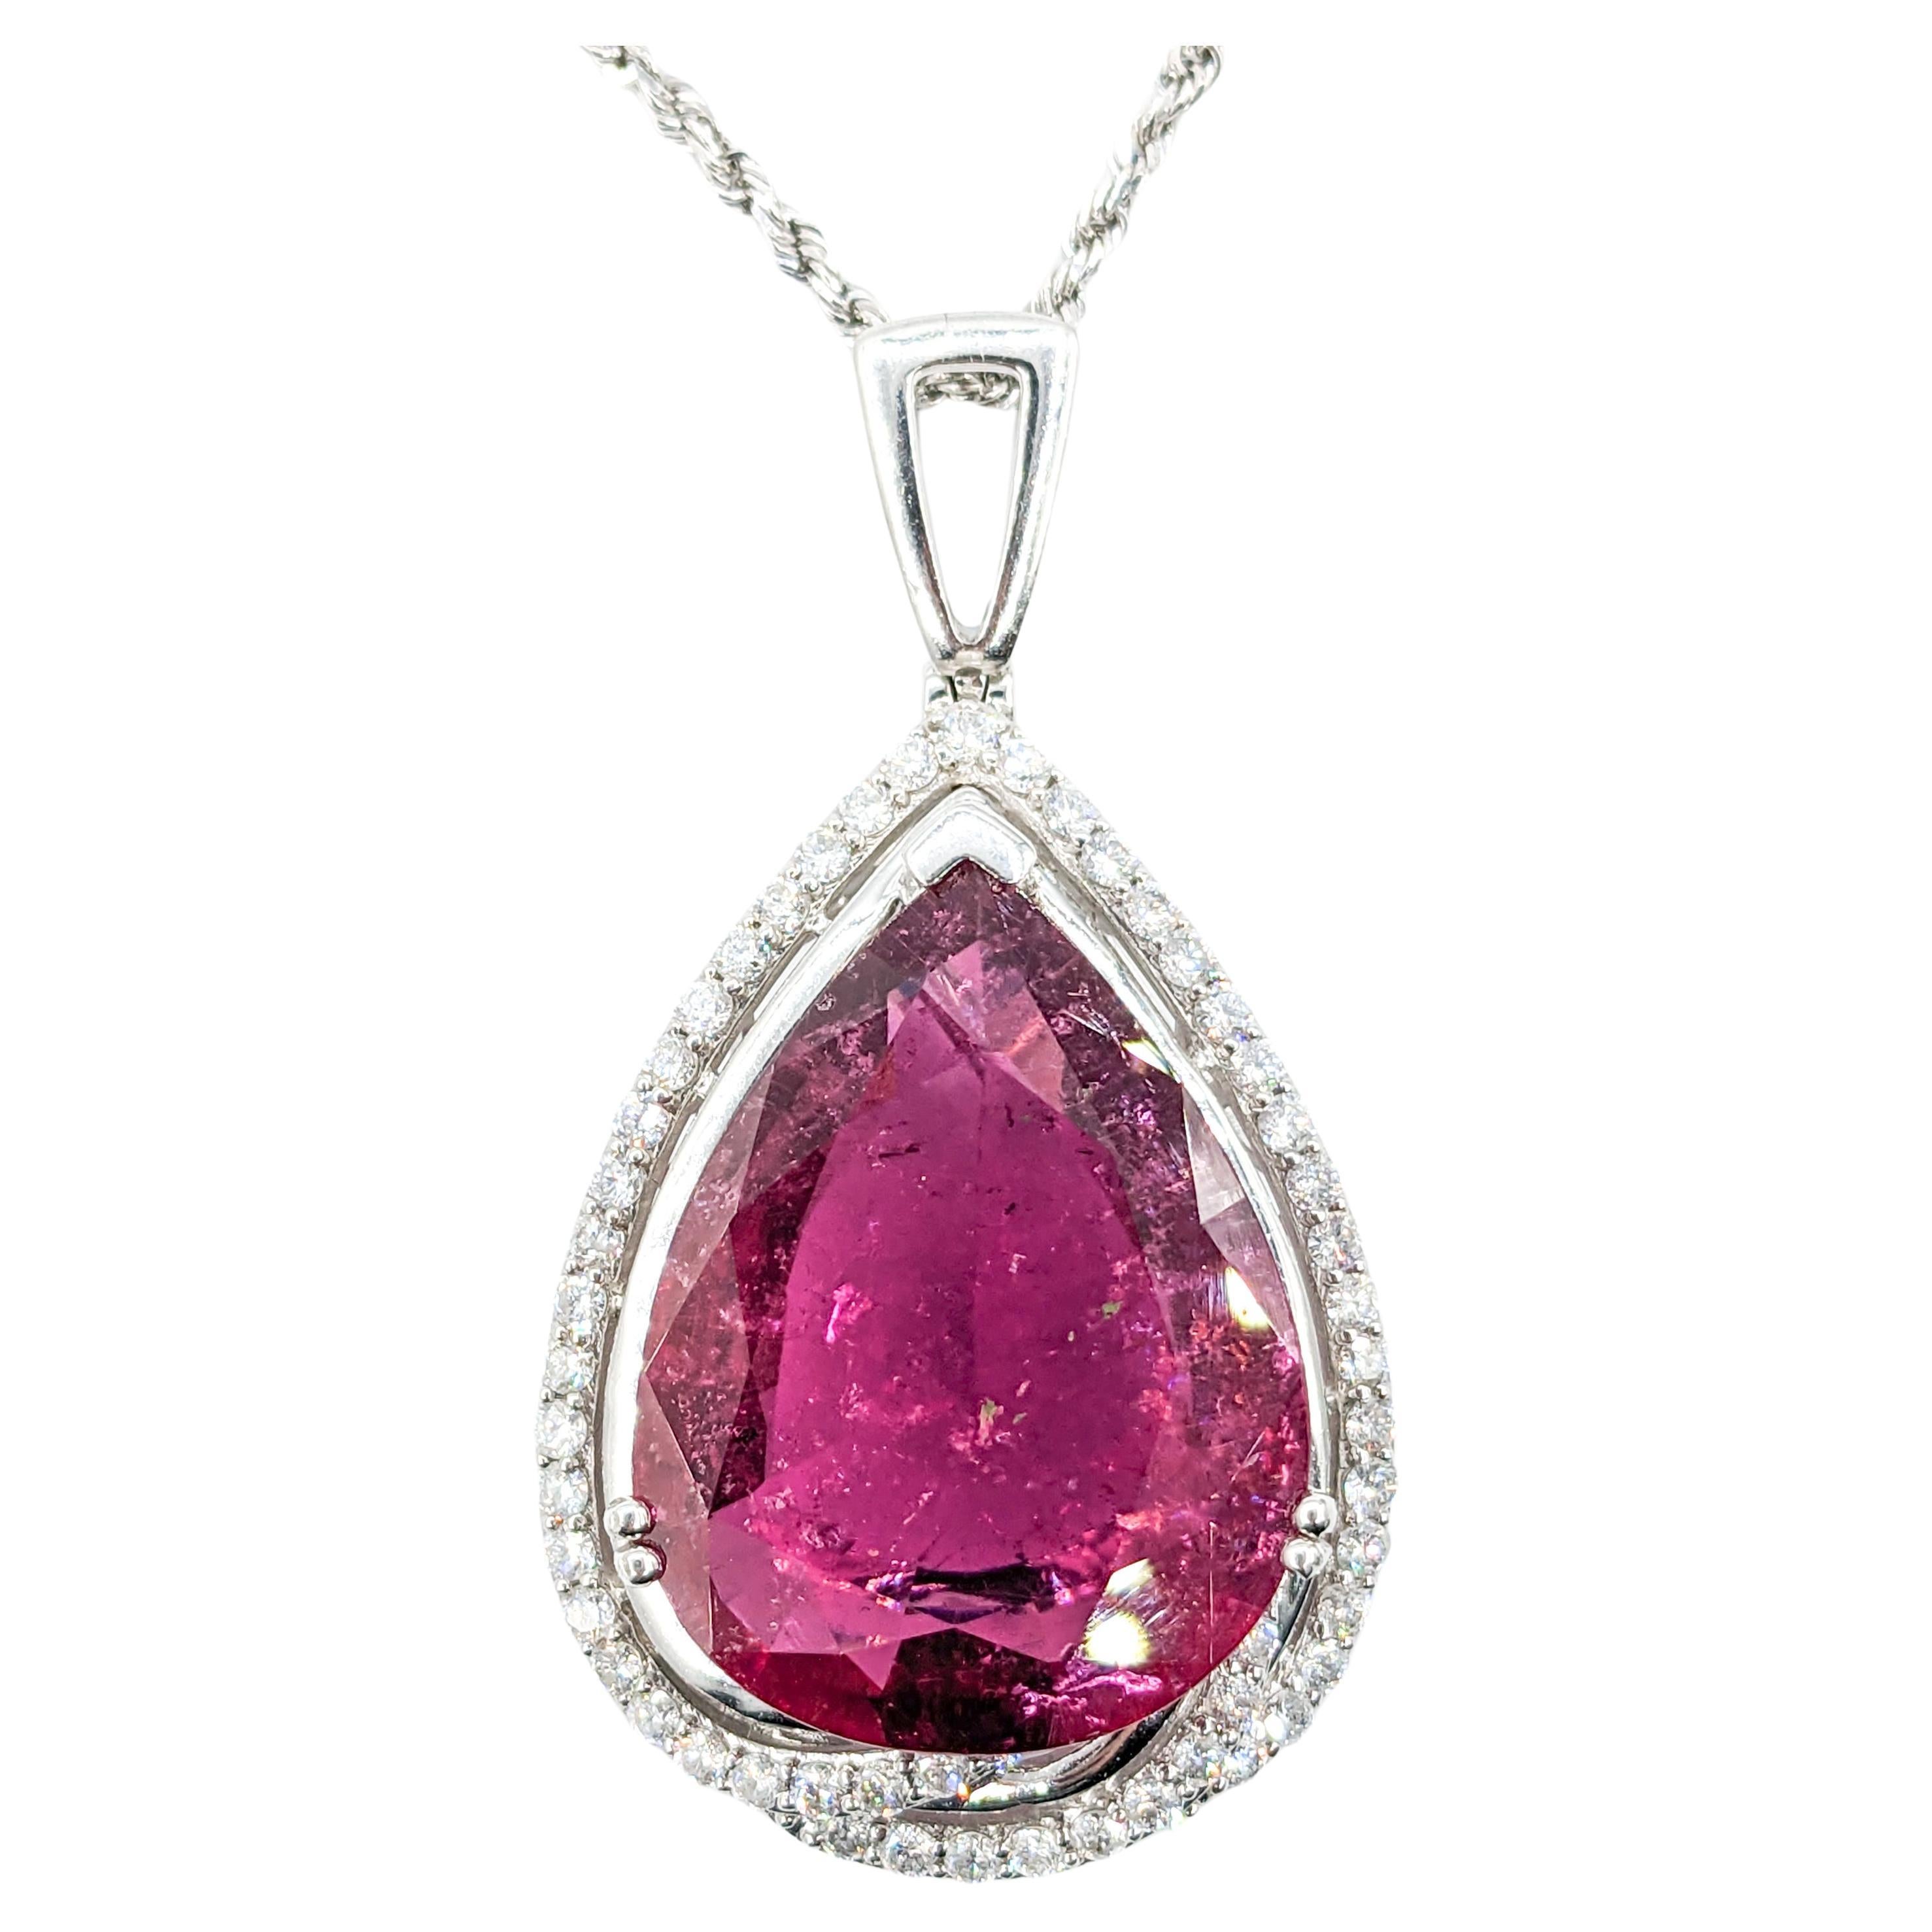 35.75ct Pink GIA Rubellite Tourmaline Pear & Diamond Necklace In Platinum For Sale